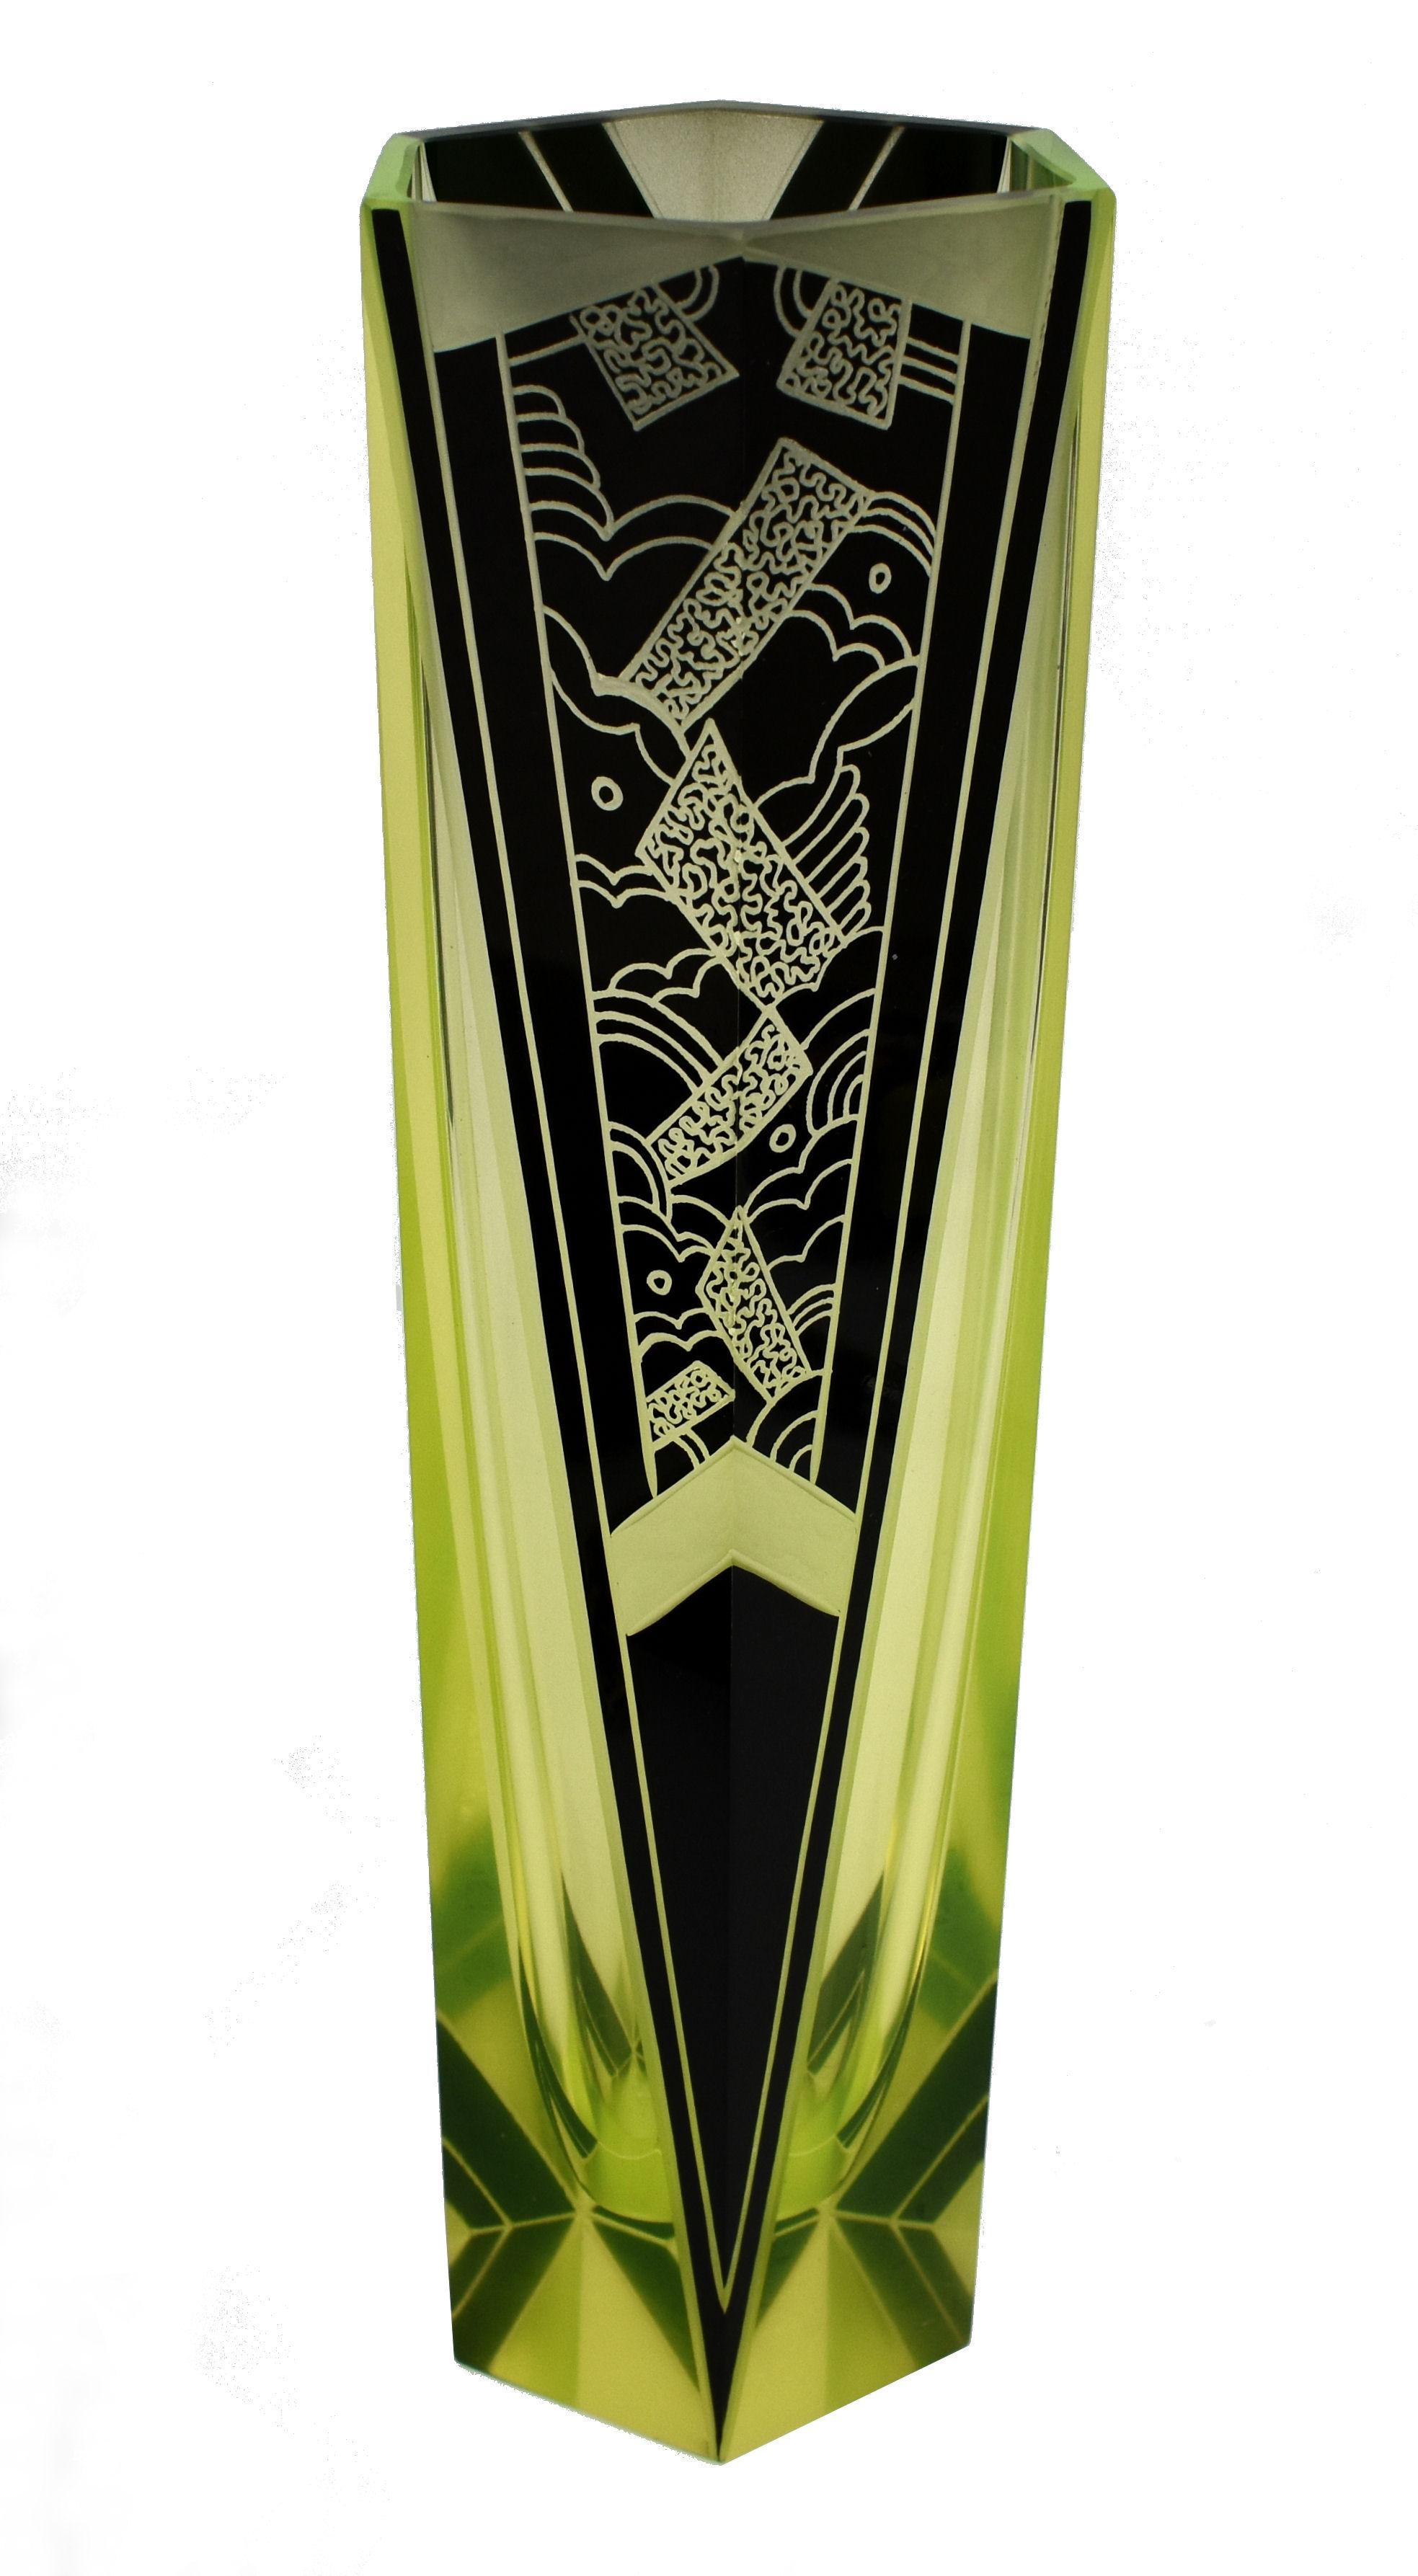 Originating from Czech republic this Art Deco vase not only visually looks stunning with it's very distinctive green / yellow colouring with jet black enamel accents but is a great size standing just over 26 cm. Condition is excellent, can't find